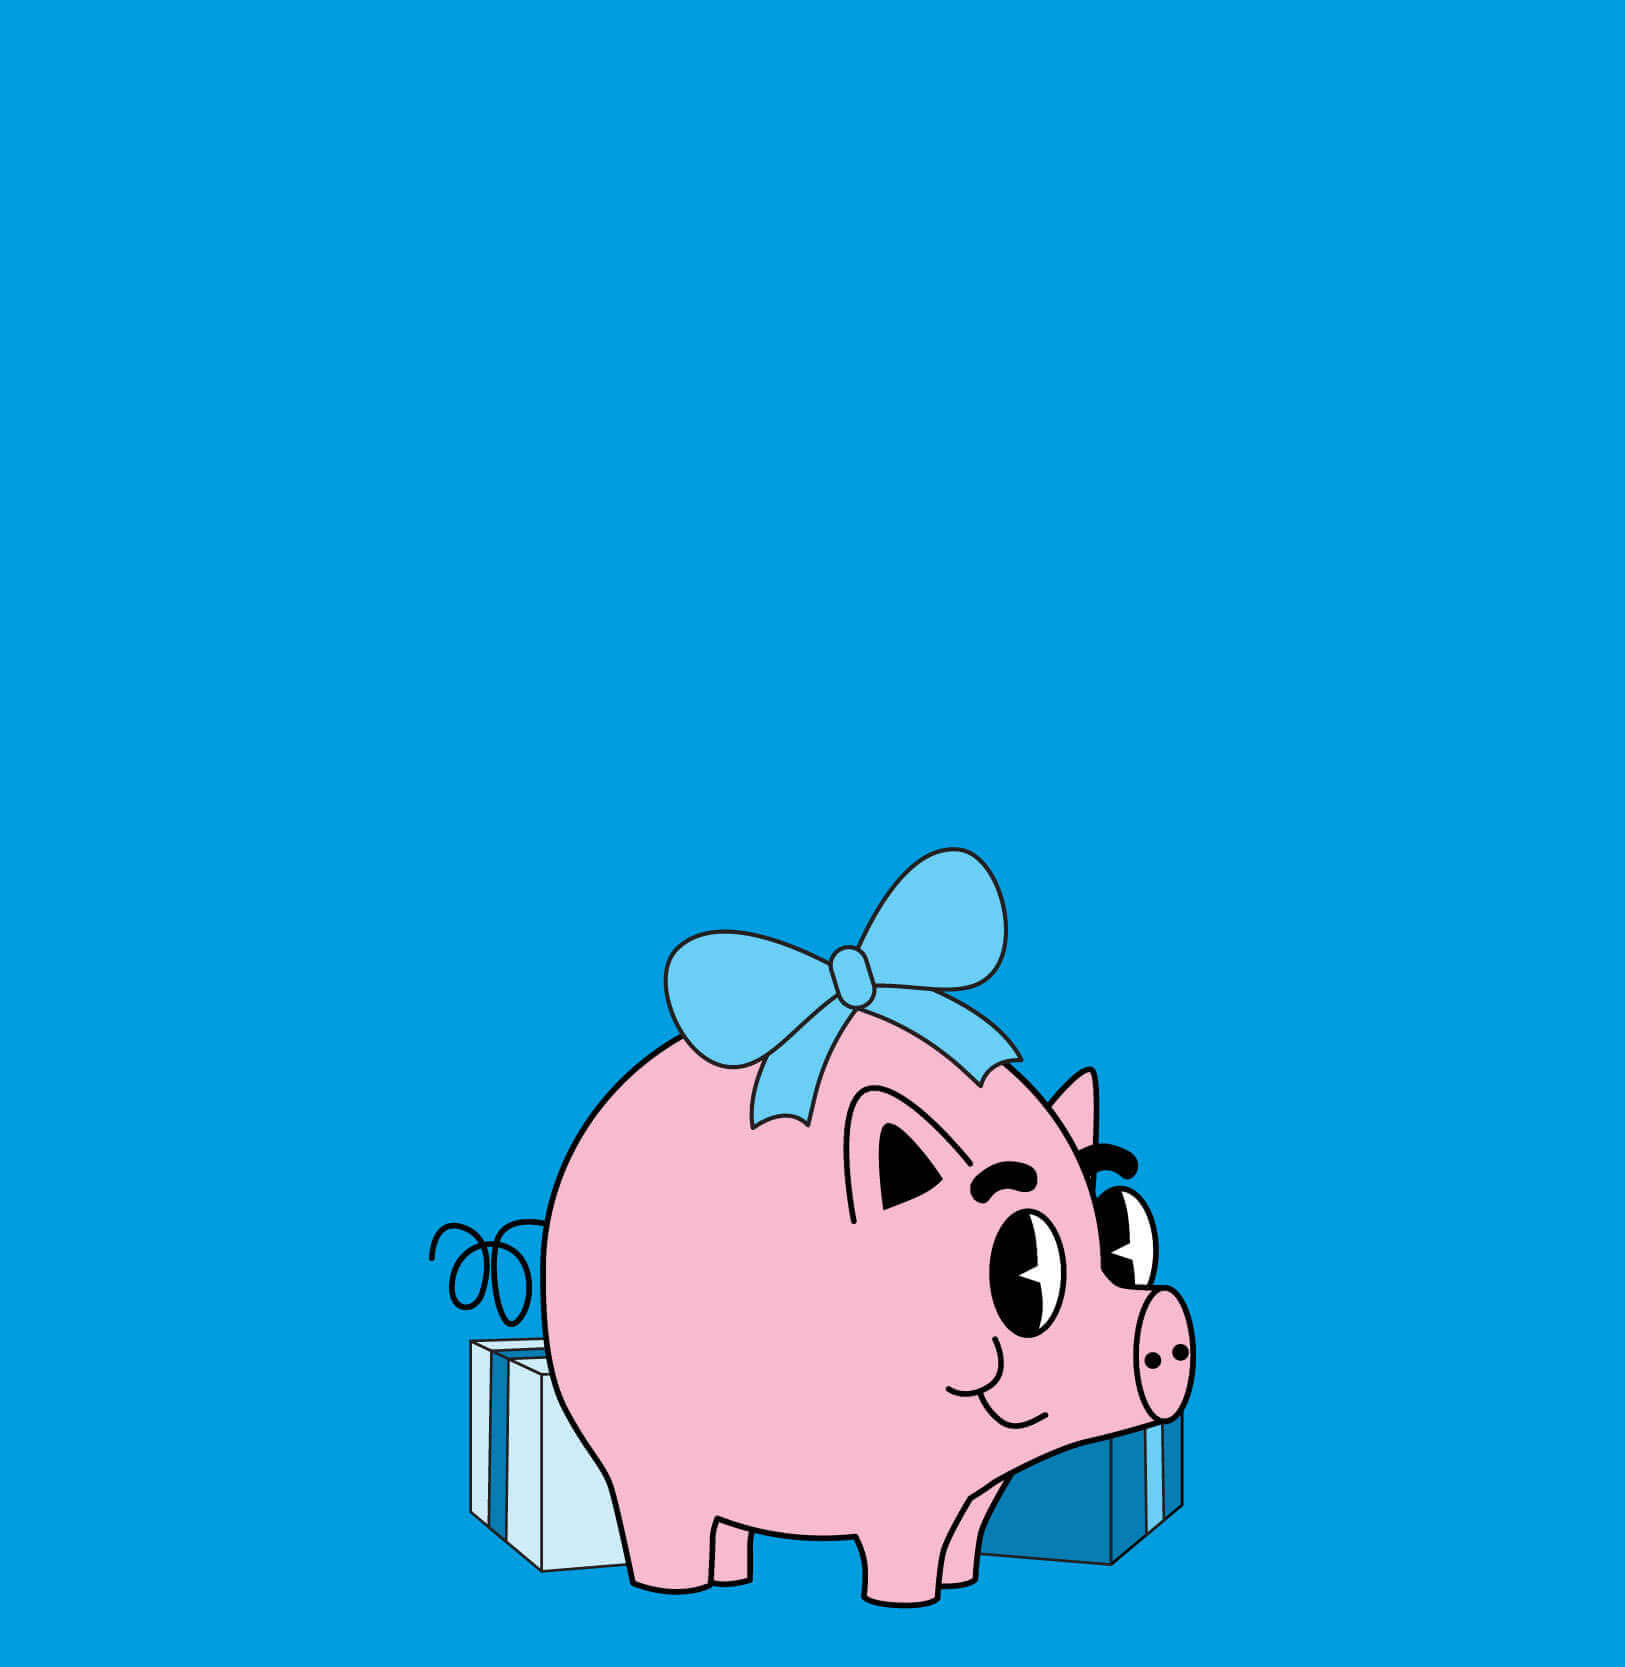 Cartoony graphic of a piggy bank standing around holiday gift boxes.